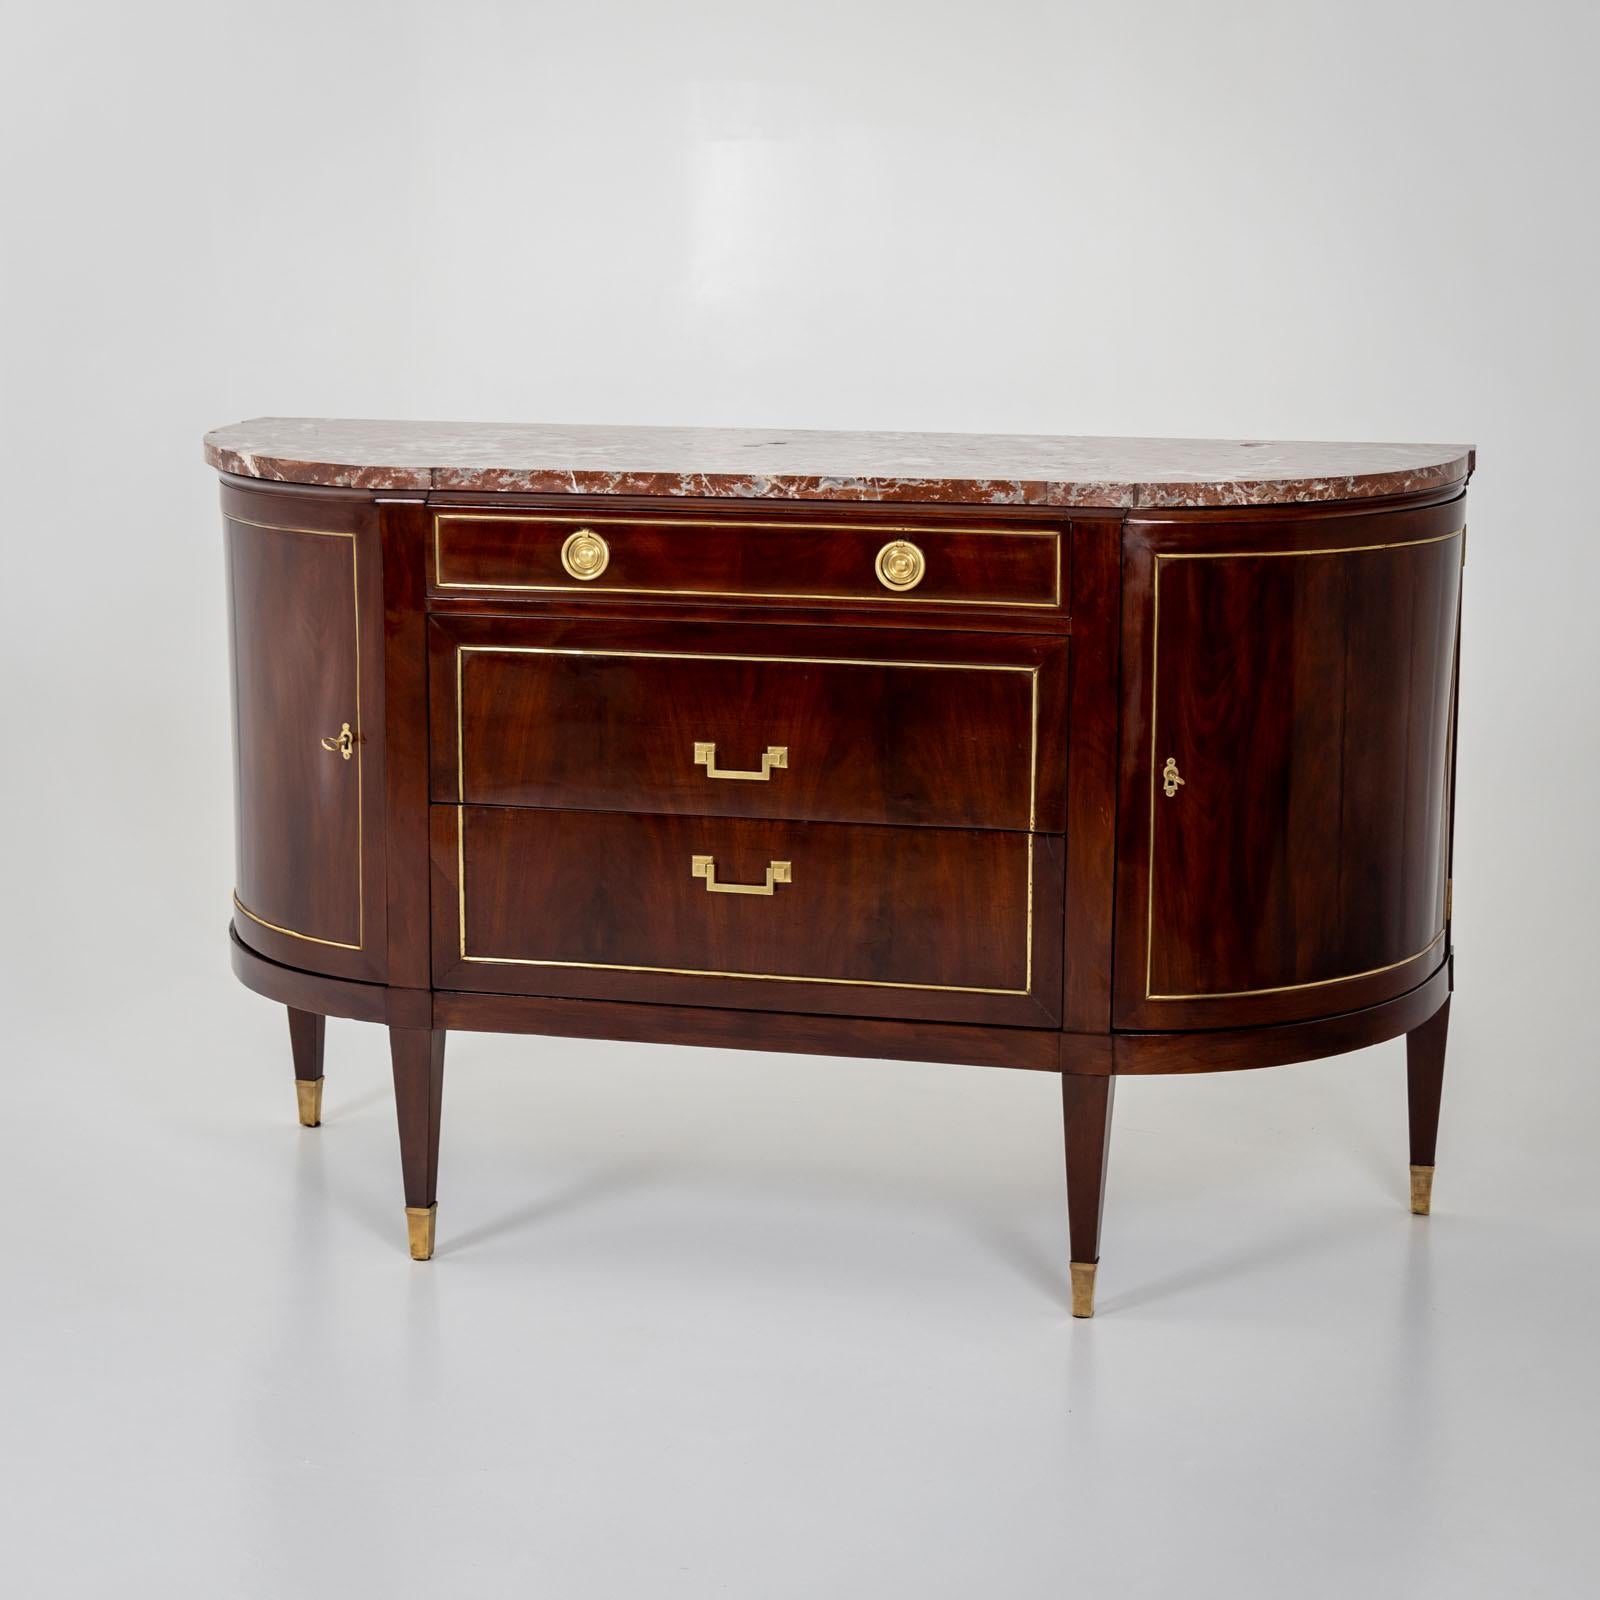 Empire Louis Seize style sideboard, 19th century For Sale